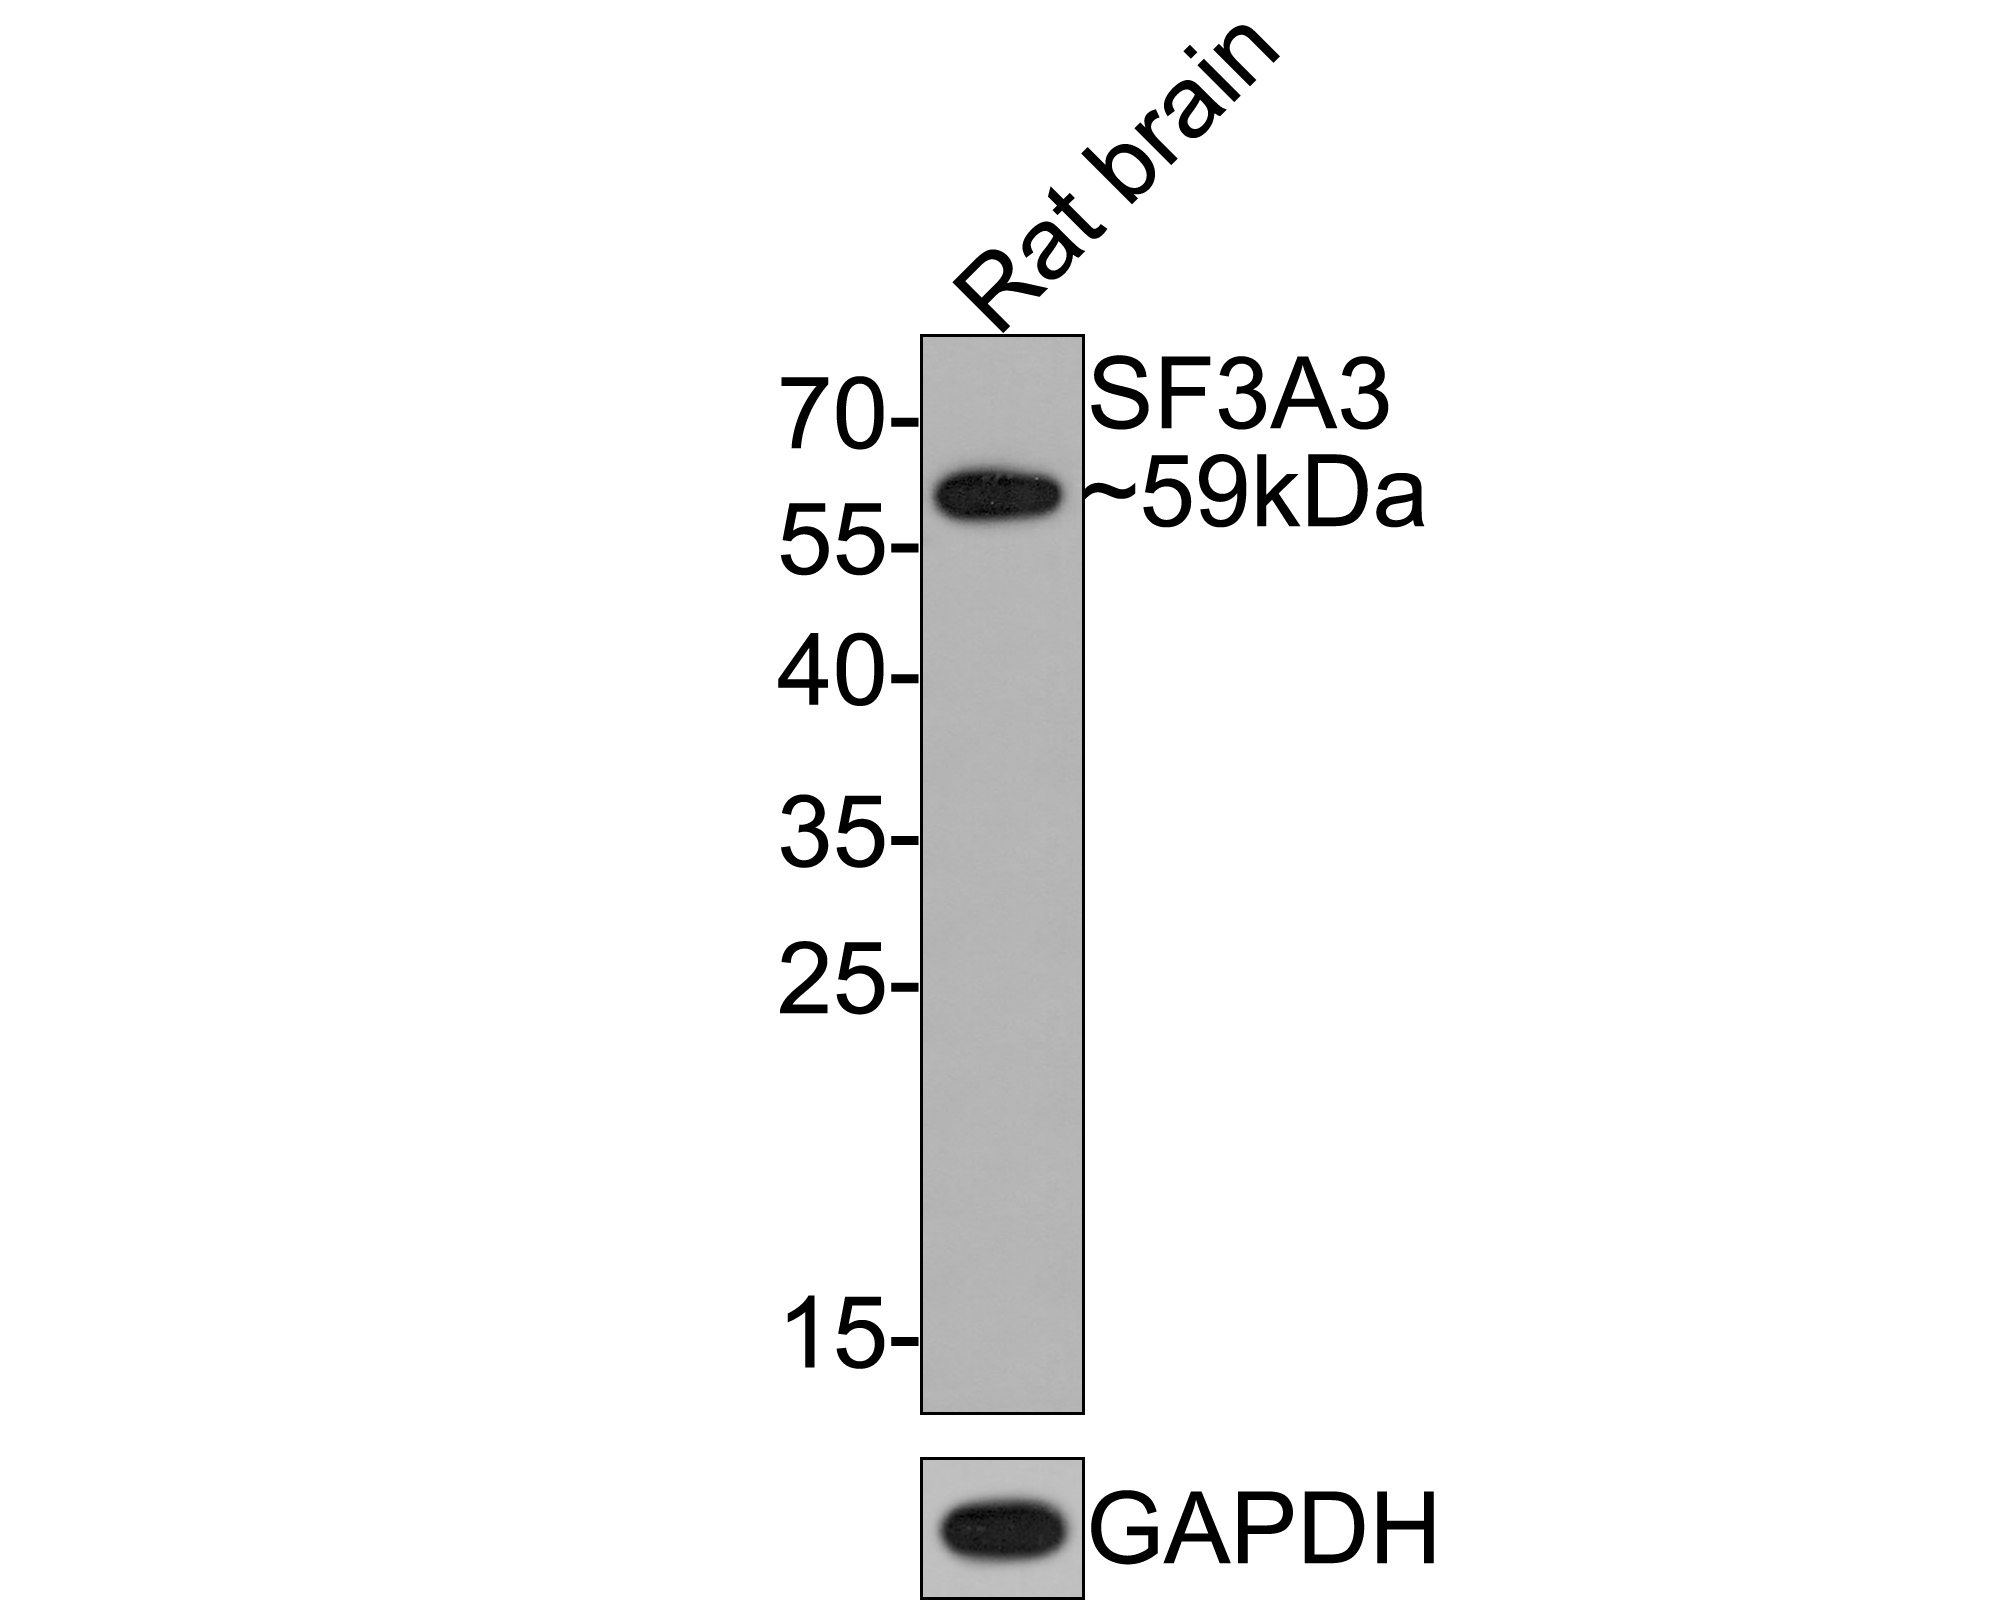 Western blot analysis of SF3A3 on rat brain tissue lysates with Rabbit anti-SF3A3 antibody (HA721114) at 1/500 dilution.<br />
<br />
Lysates/proteins at 20 µg/Lane.<br />
<br />
Predicted band size: 59 kDa<br />
Observed band size: 59 kDa<br />
<br />
Exposure time: 2 minutes;<br />
<br />
12% SDS-PAGE gel.<br />
<br />
Proteins were transferred to a PVDF membrane and blocked with 5% NFDM/TBST for 1 hour at room temperature. The primary antibody (HA721114) at 1/500 dilution was used in 5% NFDM/TBST at room temperature for 2 hours. Goat Anti-Rabbit IgG - HRP Secondary Antibody (HA1001) at 1:300,000 dilution was used for 1 hour at room temperature.